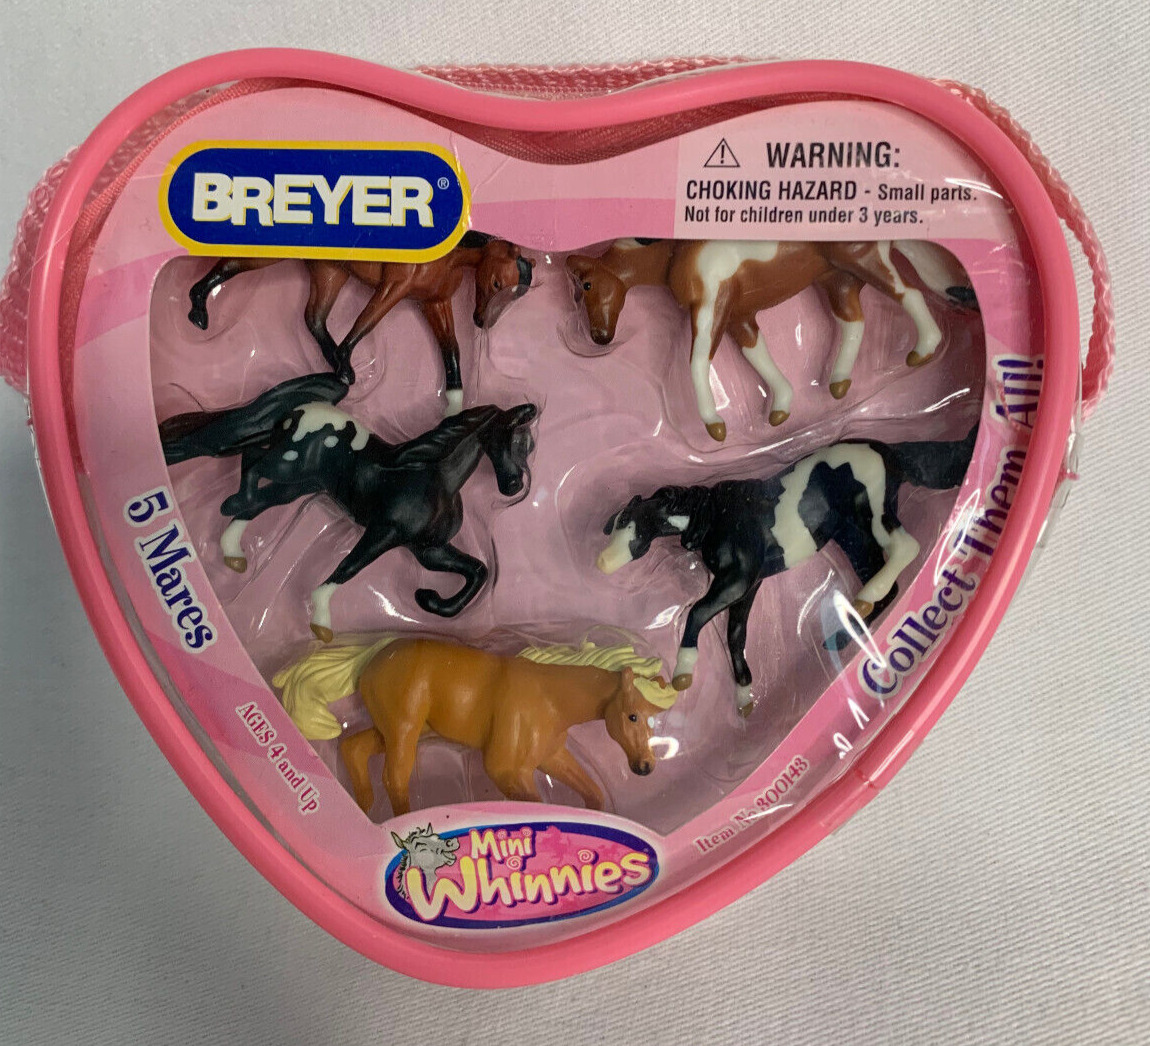 Breyer Model  Mini Whinnies 5 Mares  Horses  2008 Item  300143  New Old Stock